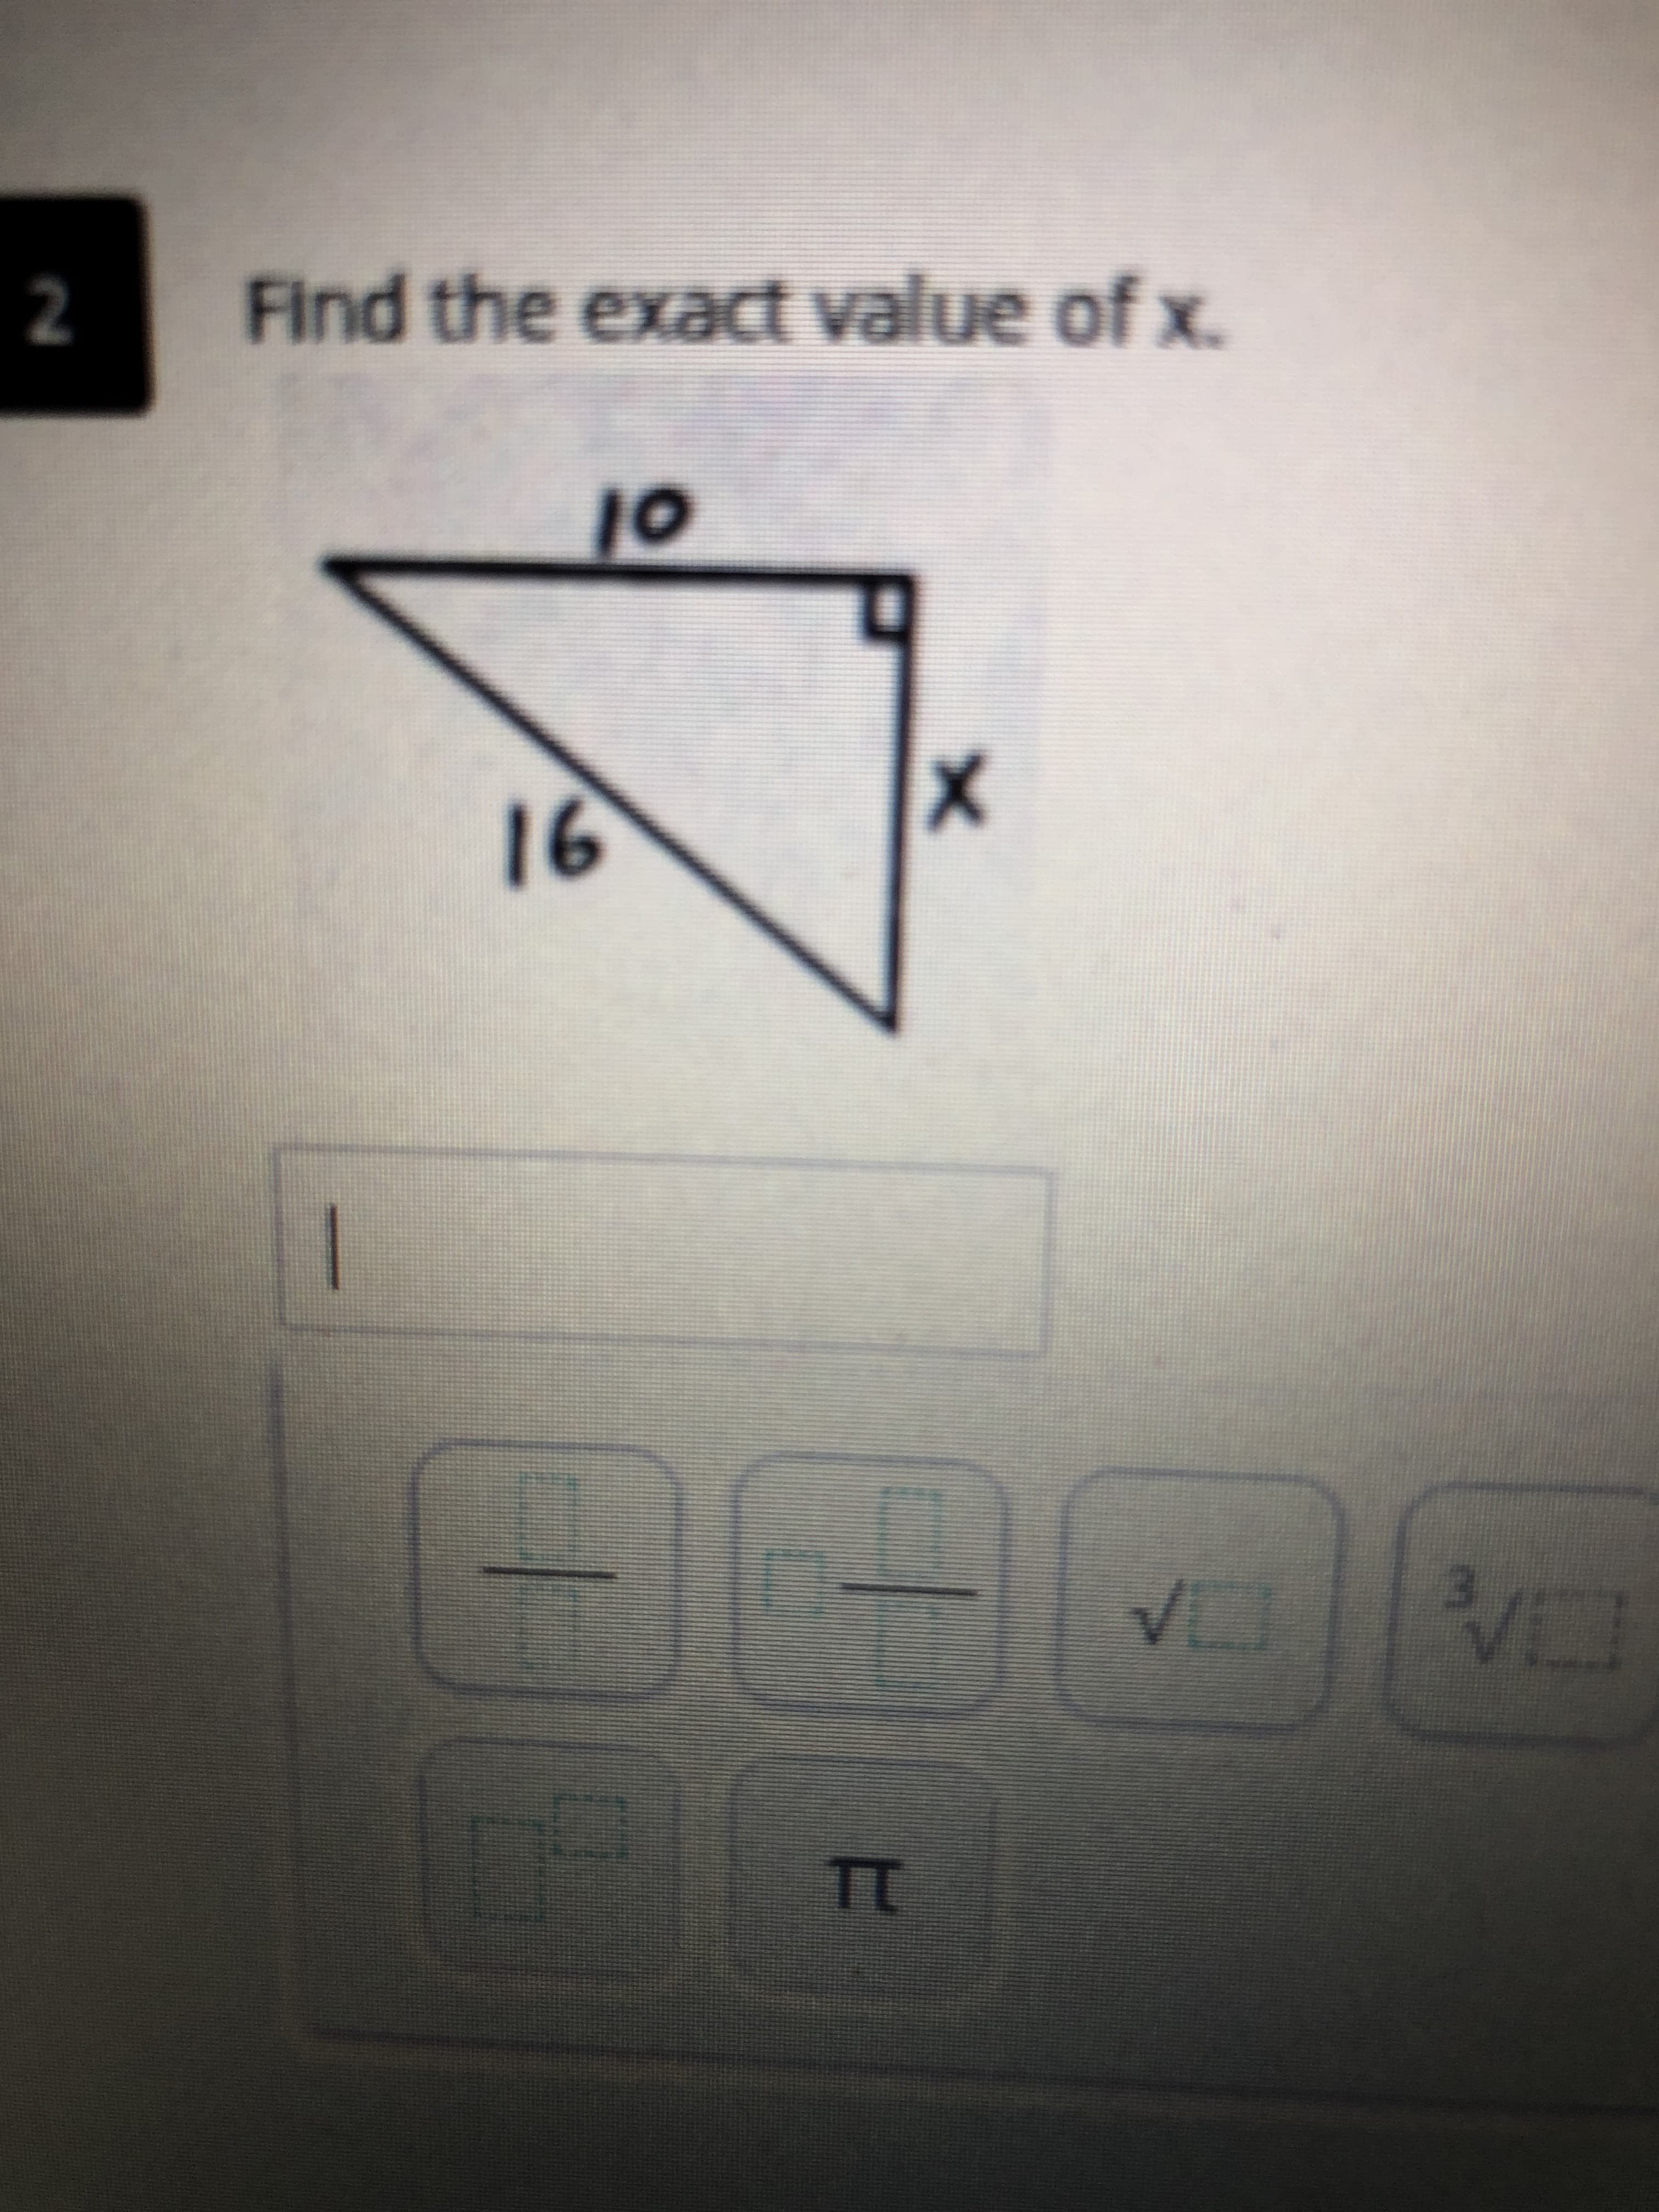 Find the exact value of x.
10
16
